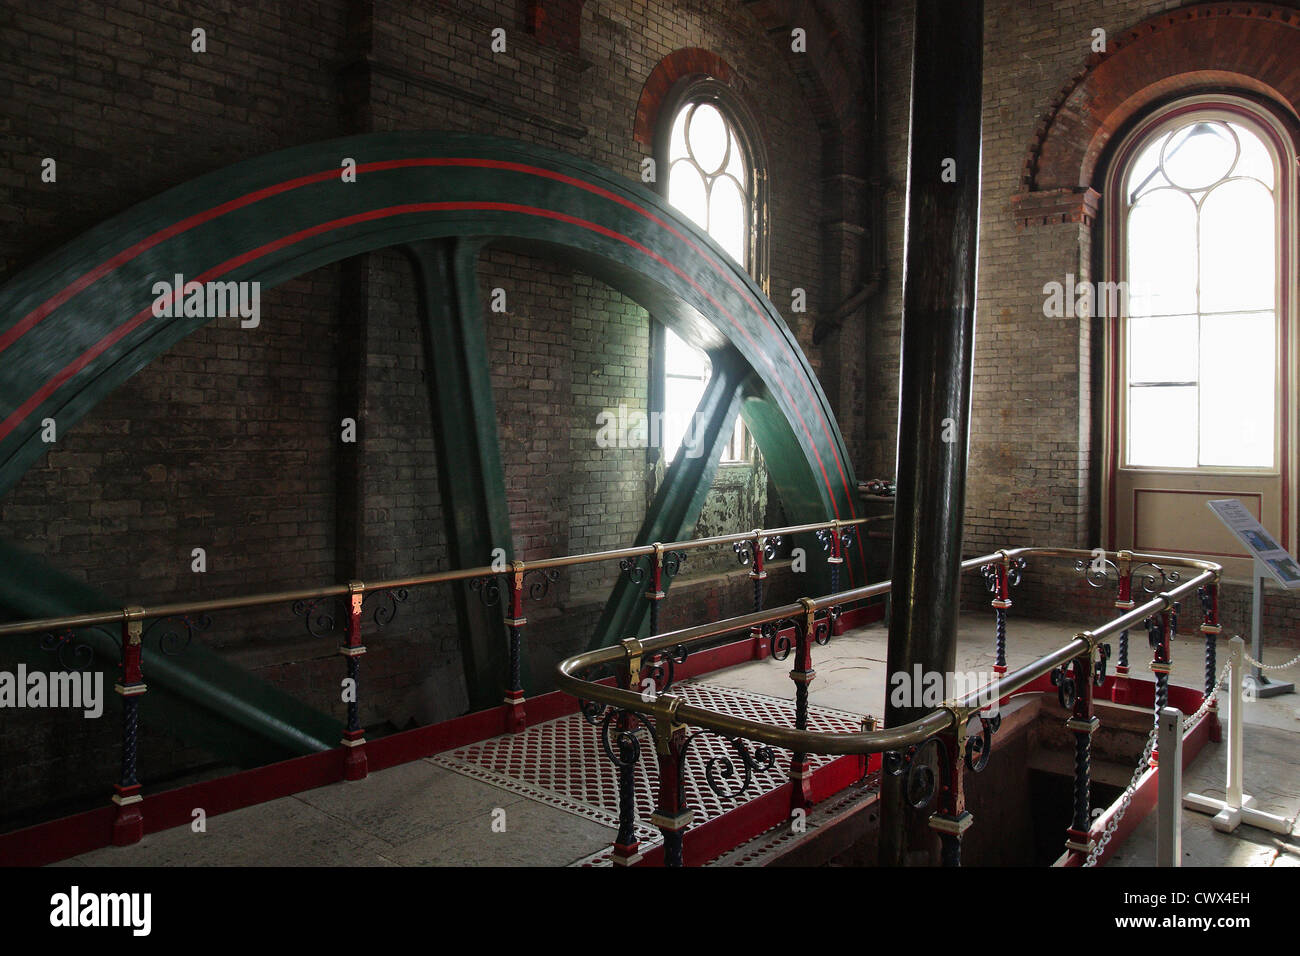 Interior of Crossness pumping station, built in Victorian times by Joseph Bazalgette as part of the Thames sewerage system. Stock Photo